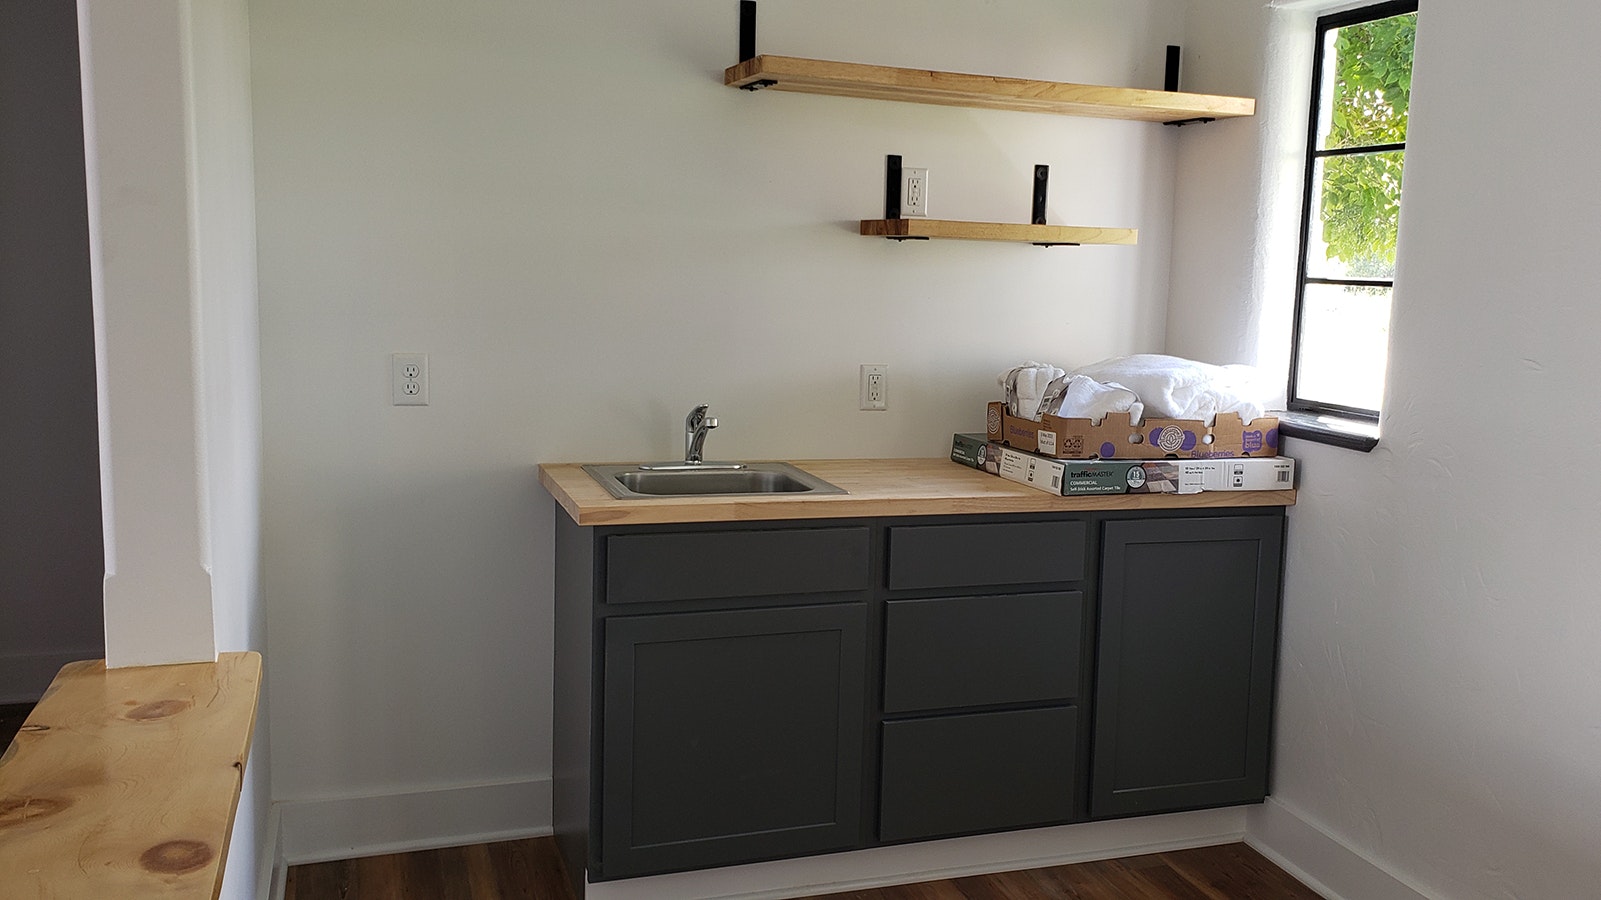 Some of the units are large enough to include a roomy kitchenette, making them perfect for an extended stay.